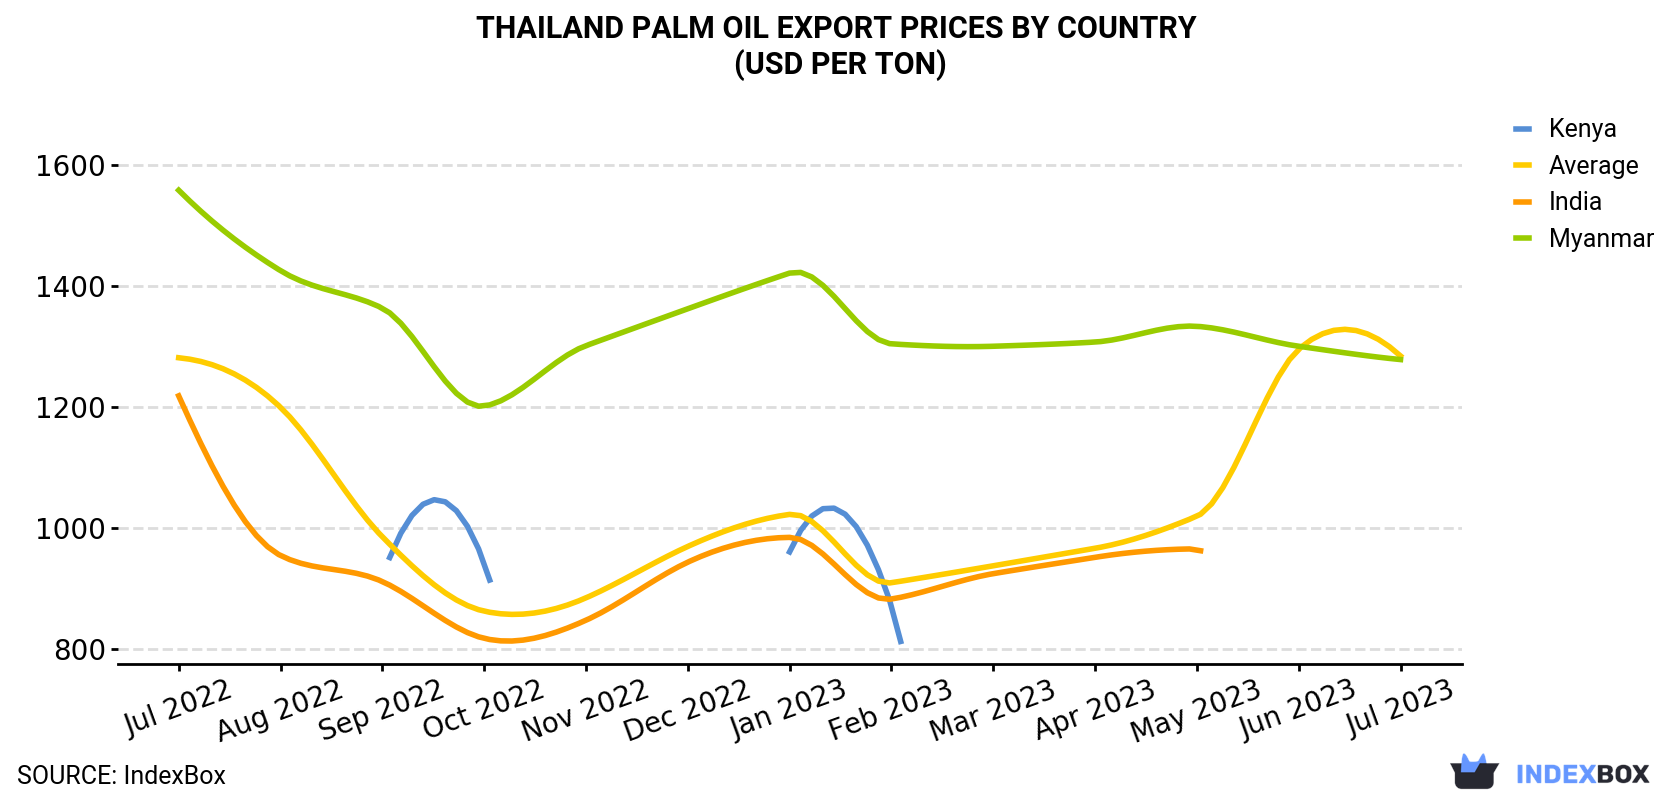 Thailand Palm Oil Export Prices By Country (USD Per Ton)